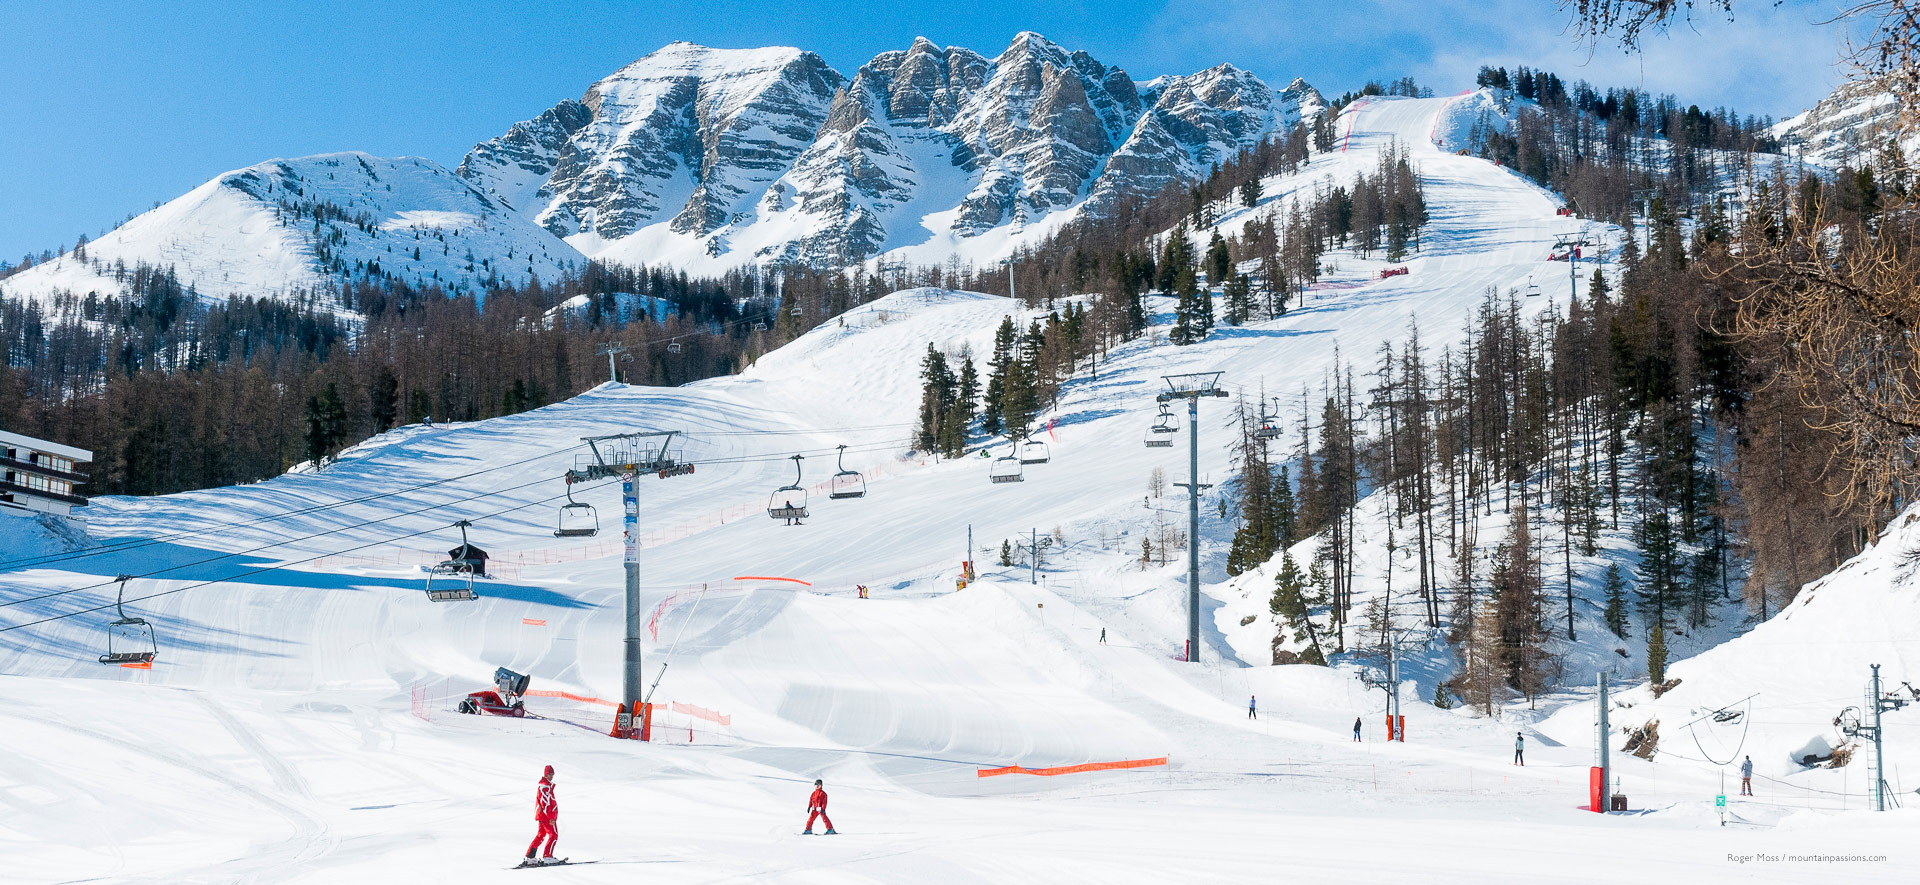 Early morning skiers on near-empty pistes, with trees and ski lifts